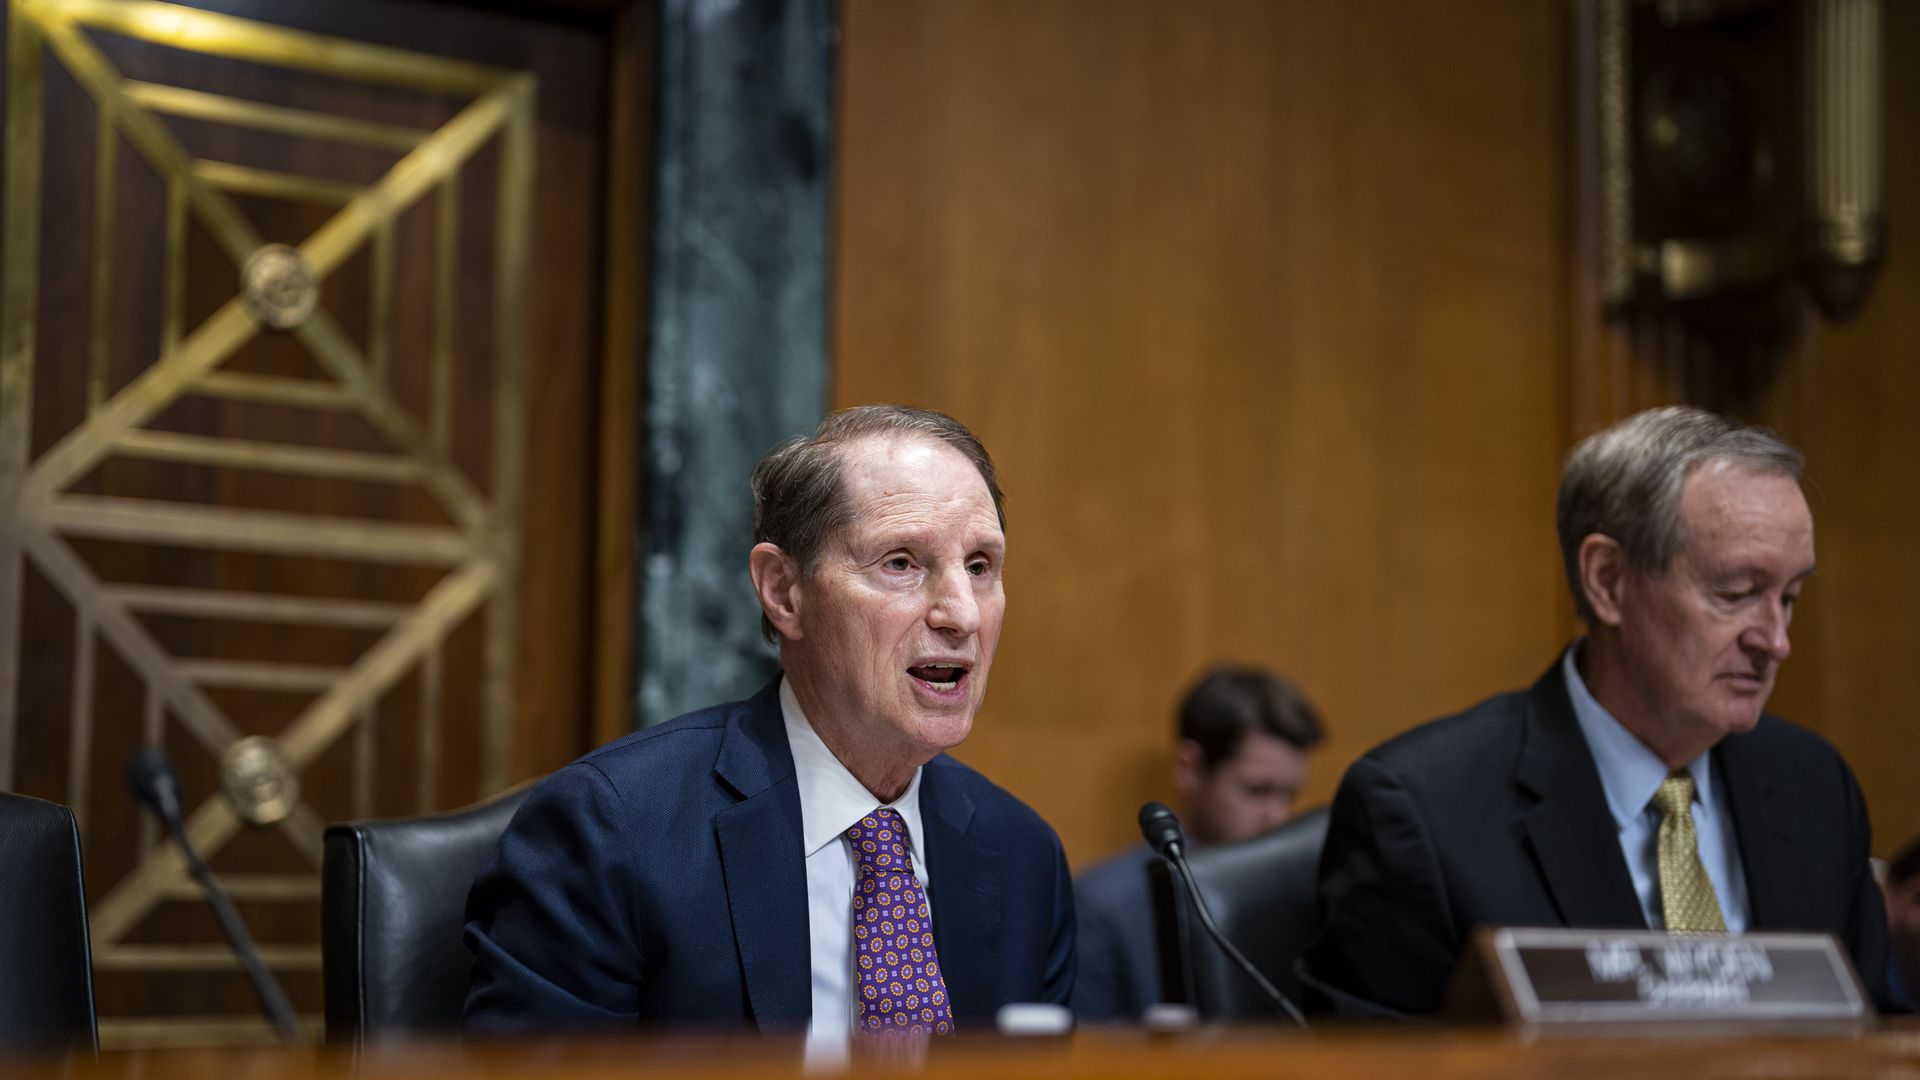 Senator Ron Wyden, a Democrat from Oregon and chairman of the Senate Finance Committee, speaks beside Senator Mike Crapo, a Republican from Idaho and ranking member of the Senate Finance Committee, during a hearing in Washington, DC, in April 2023